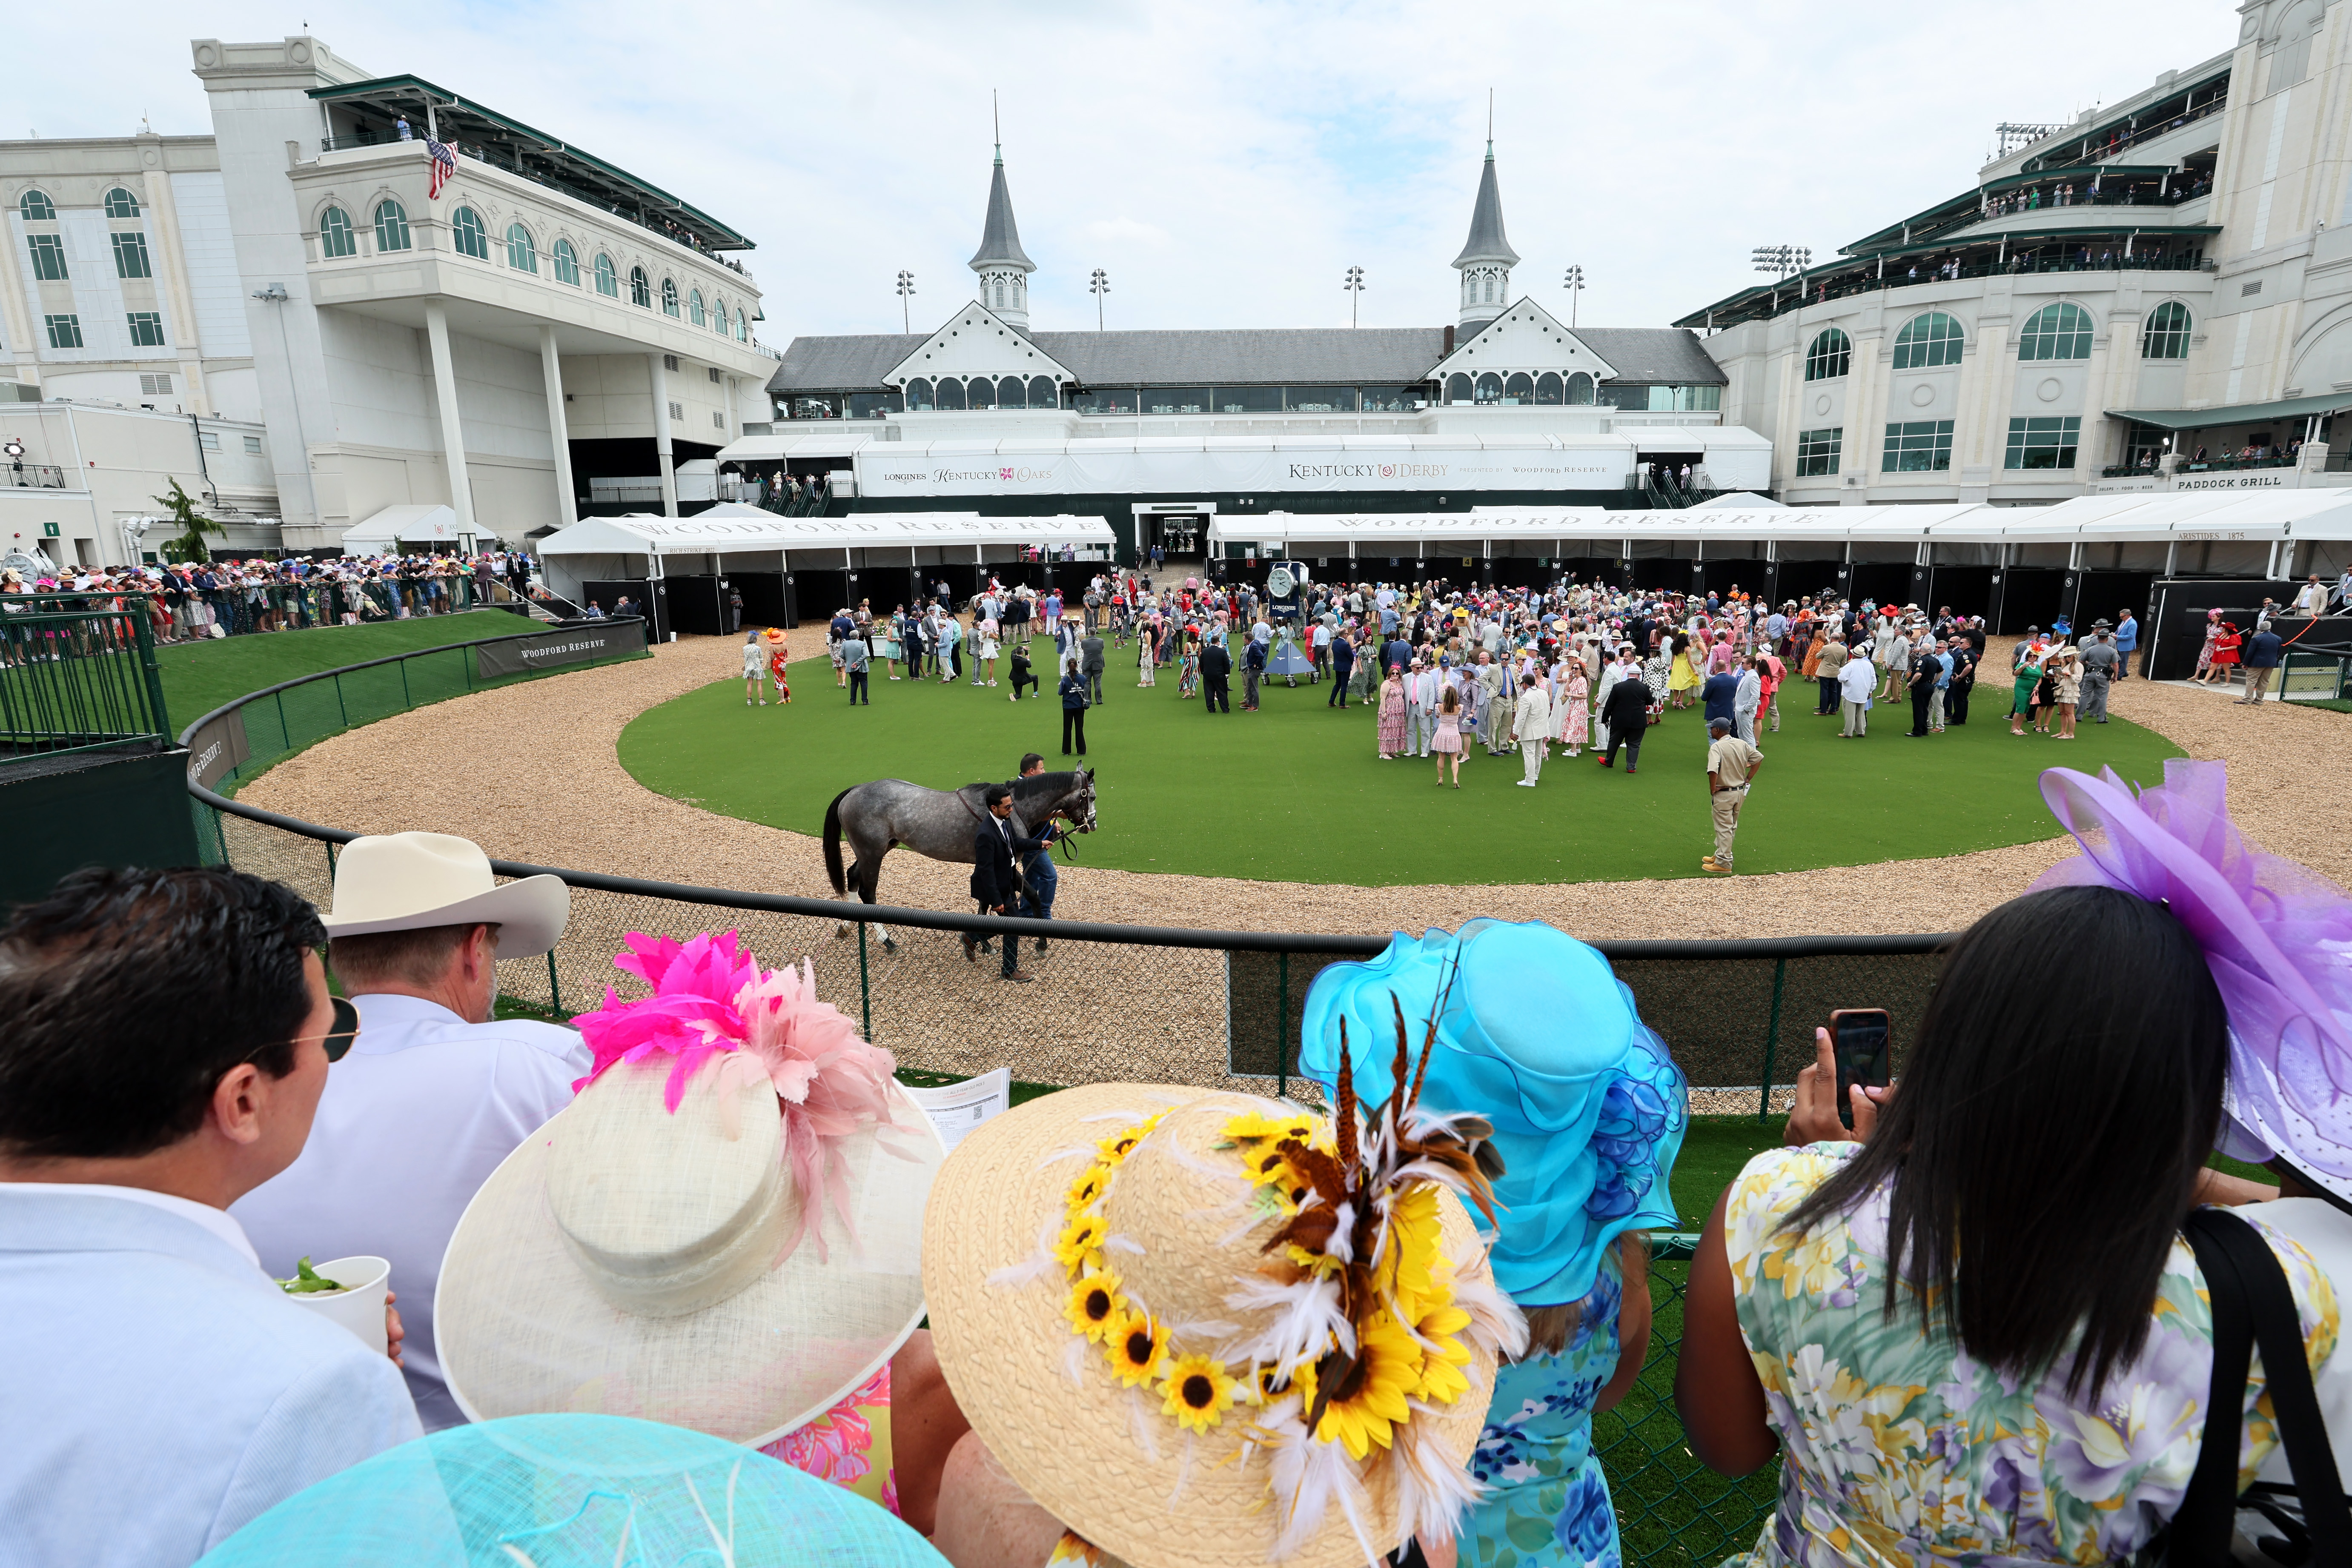 Spectators look on as horses are walked in the paddock during an undercard race before the 149th Kentucky Derby at Churchill Downs on May 06, 2023 in Louisville, Kentucky.